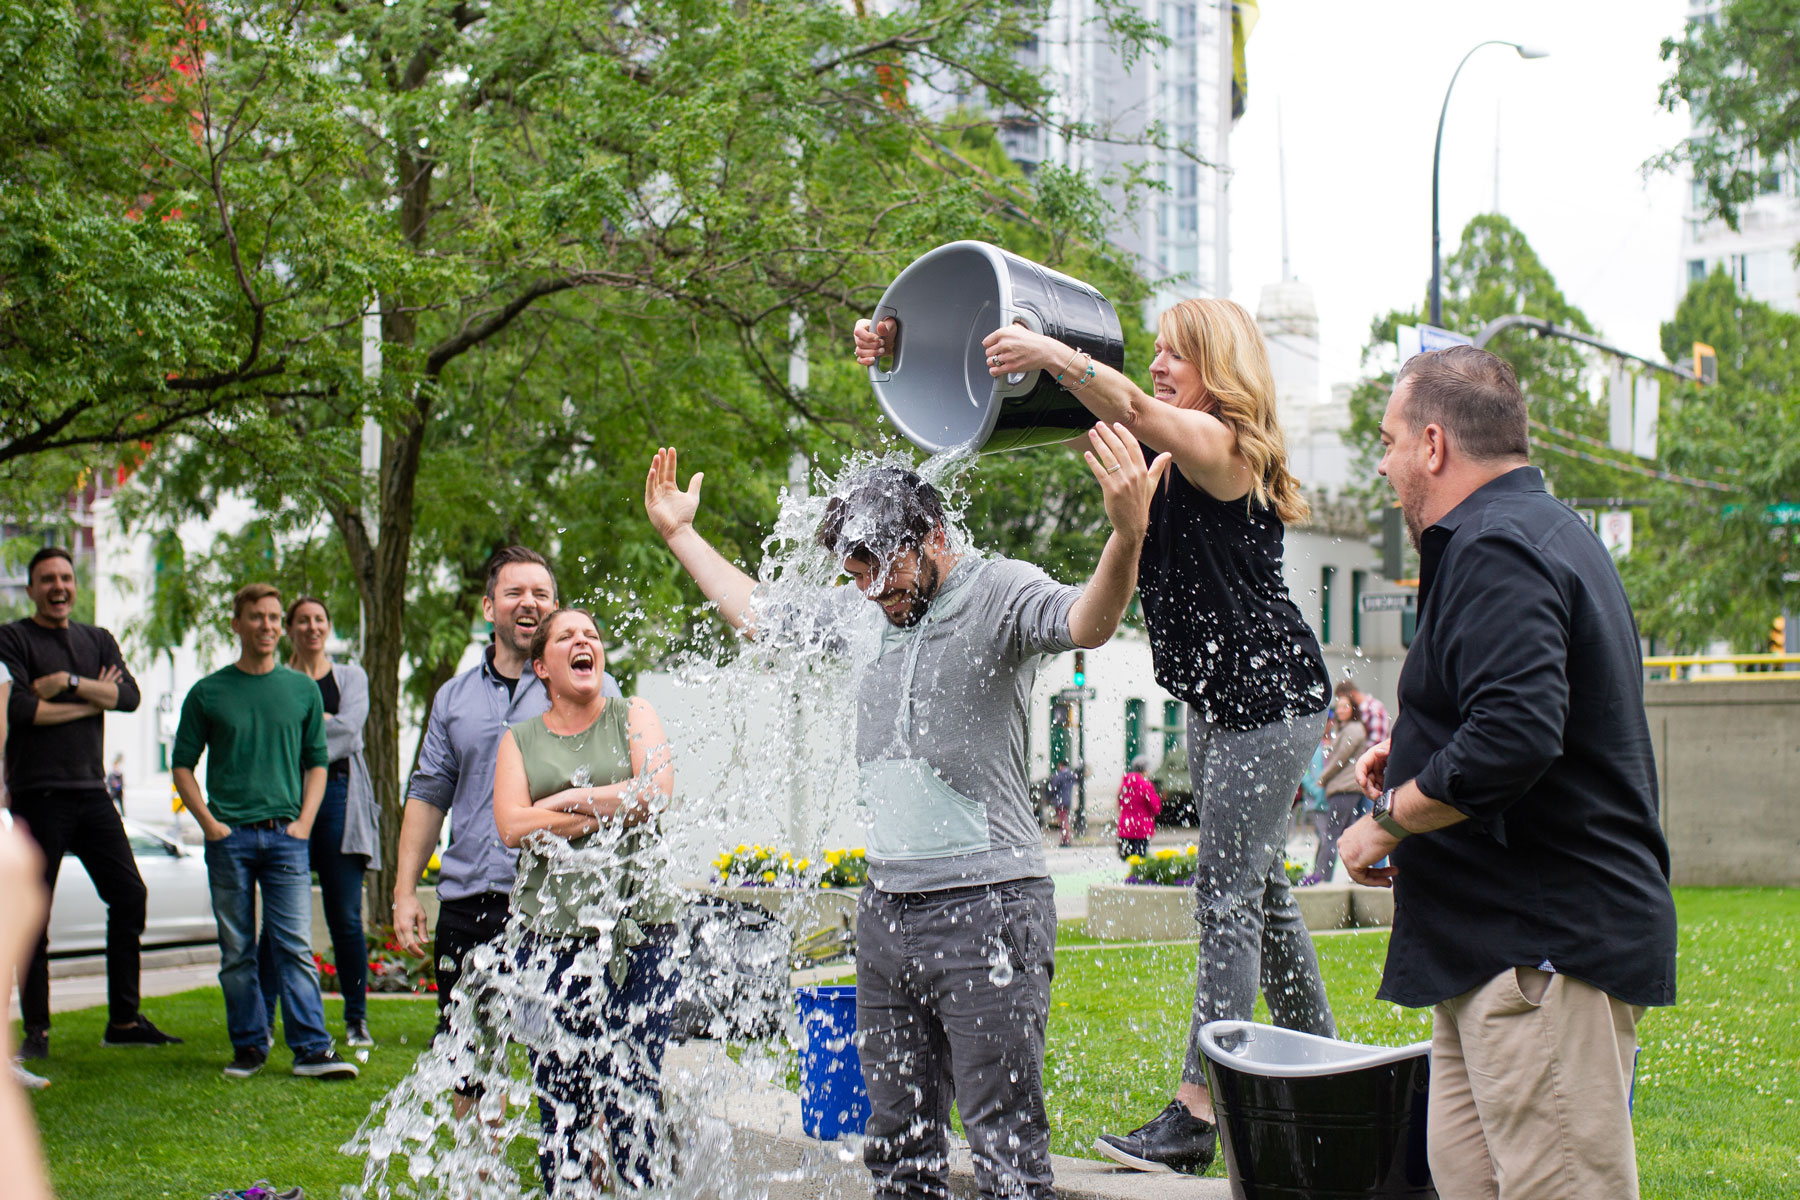 a lady pouring a bucket of water on a man's head while a crowd is watching